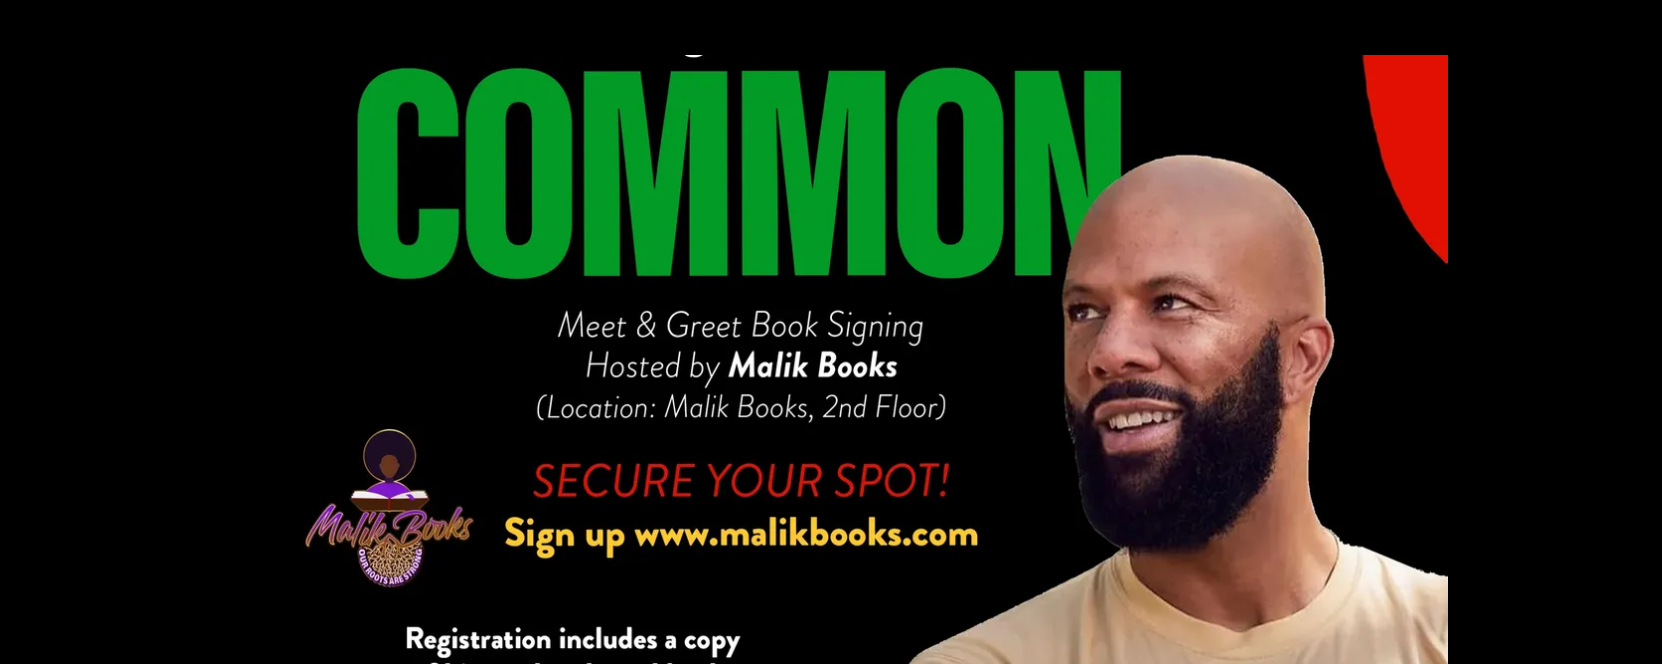 The image shows a man with a beard. The text in the image promotes a Meet & Greet Book Signing event hosted by Malik Books, with information on how to register and secure a spot. The image may also include a bottle as part of the graphic design.